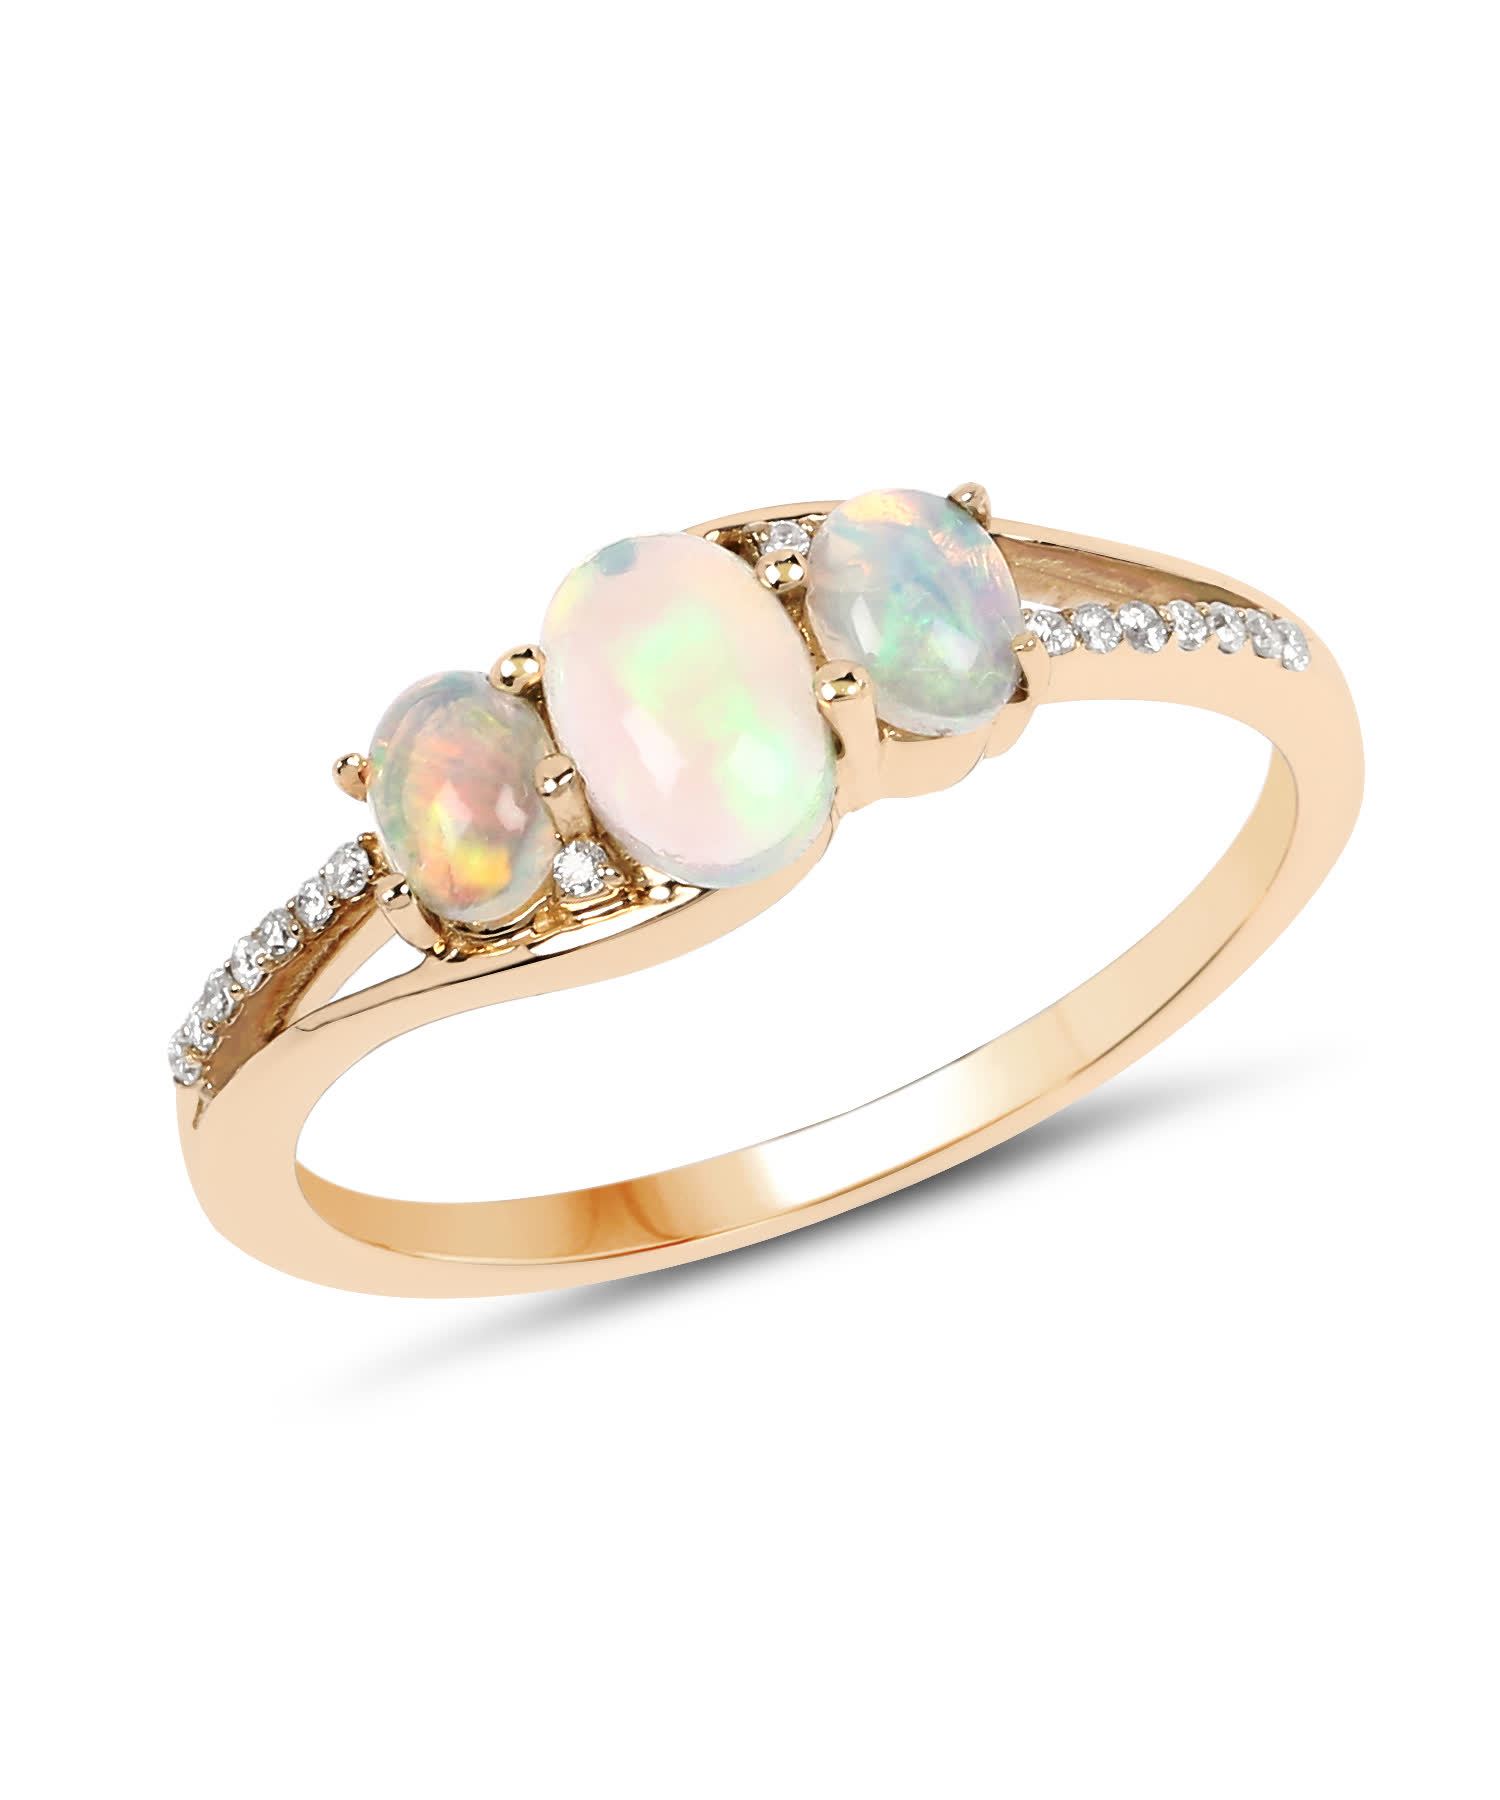 0.56ctw Natural Ethiopian Opal and Diamond 14k Gold Three-Stone Ring View 1